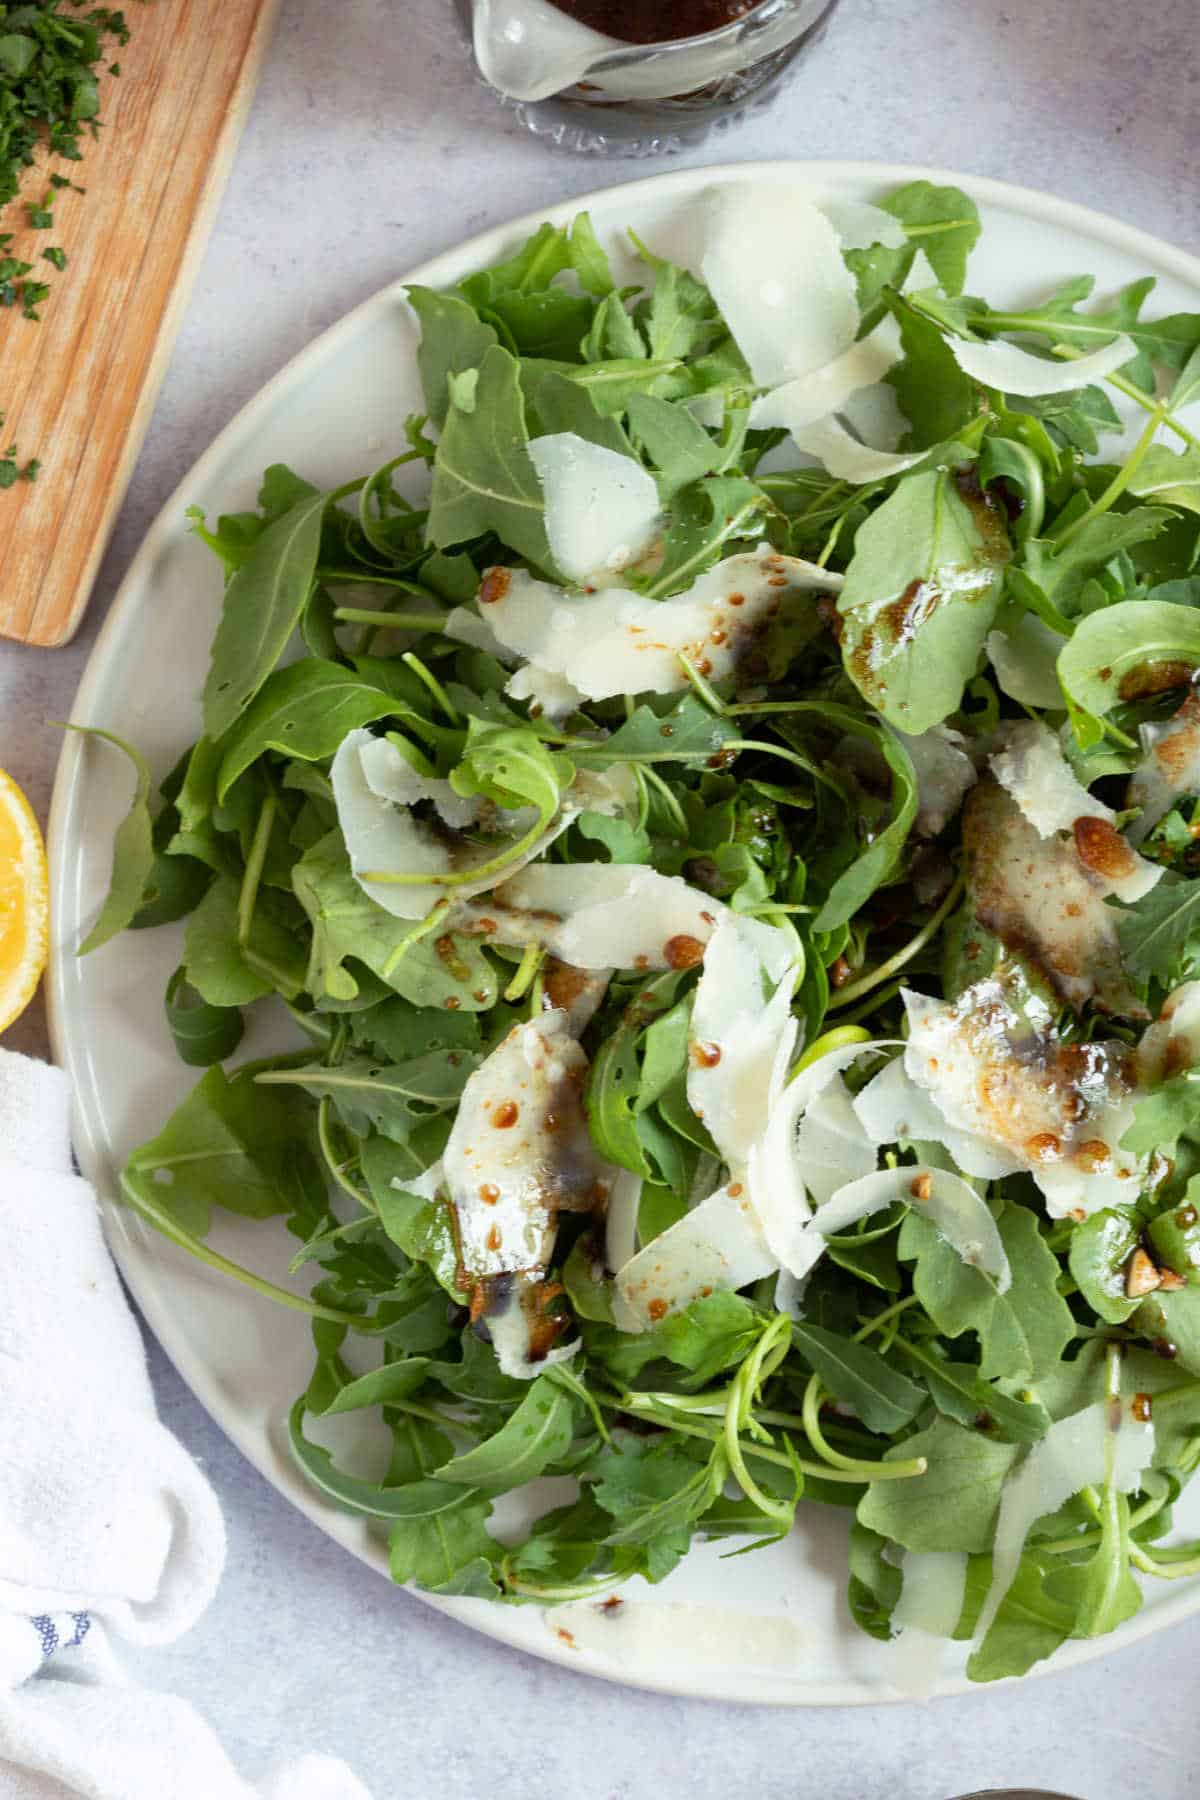 Rocket salad with a balsamic dressing.